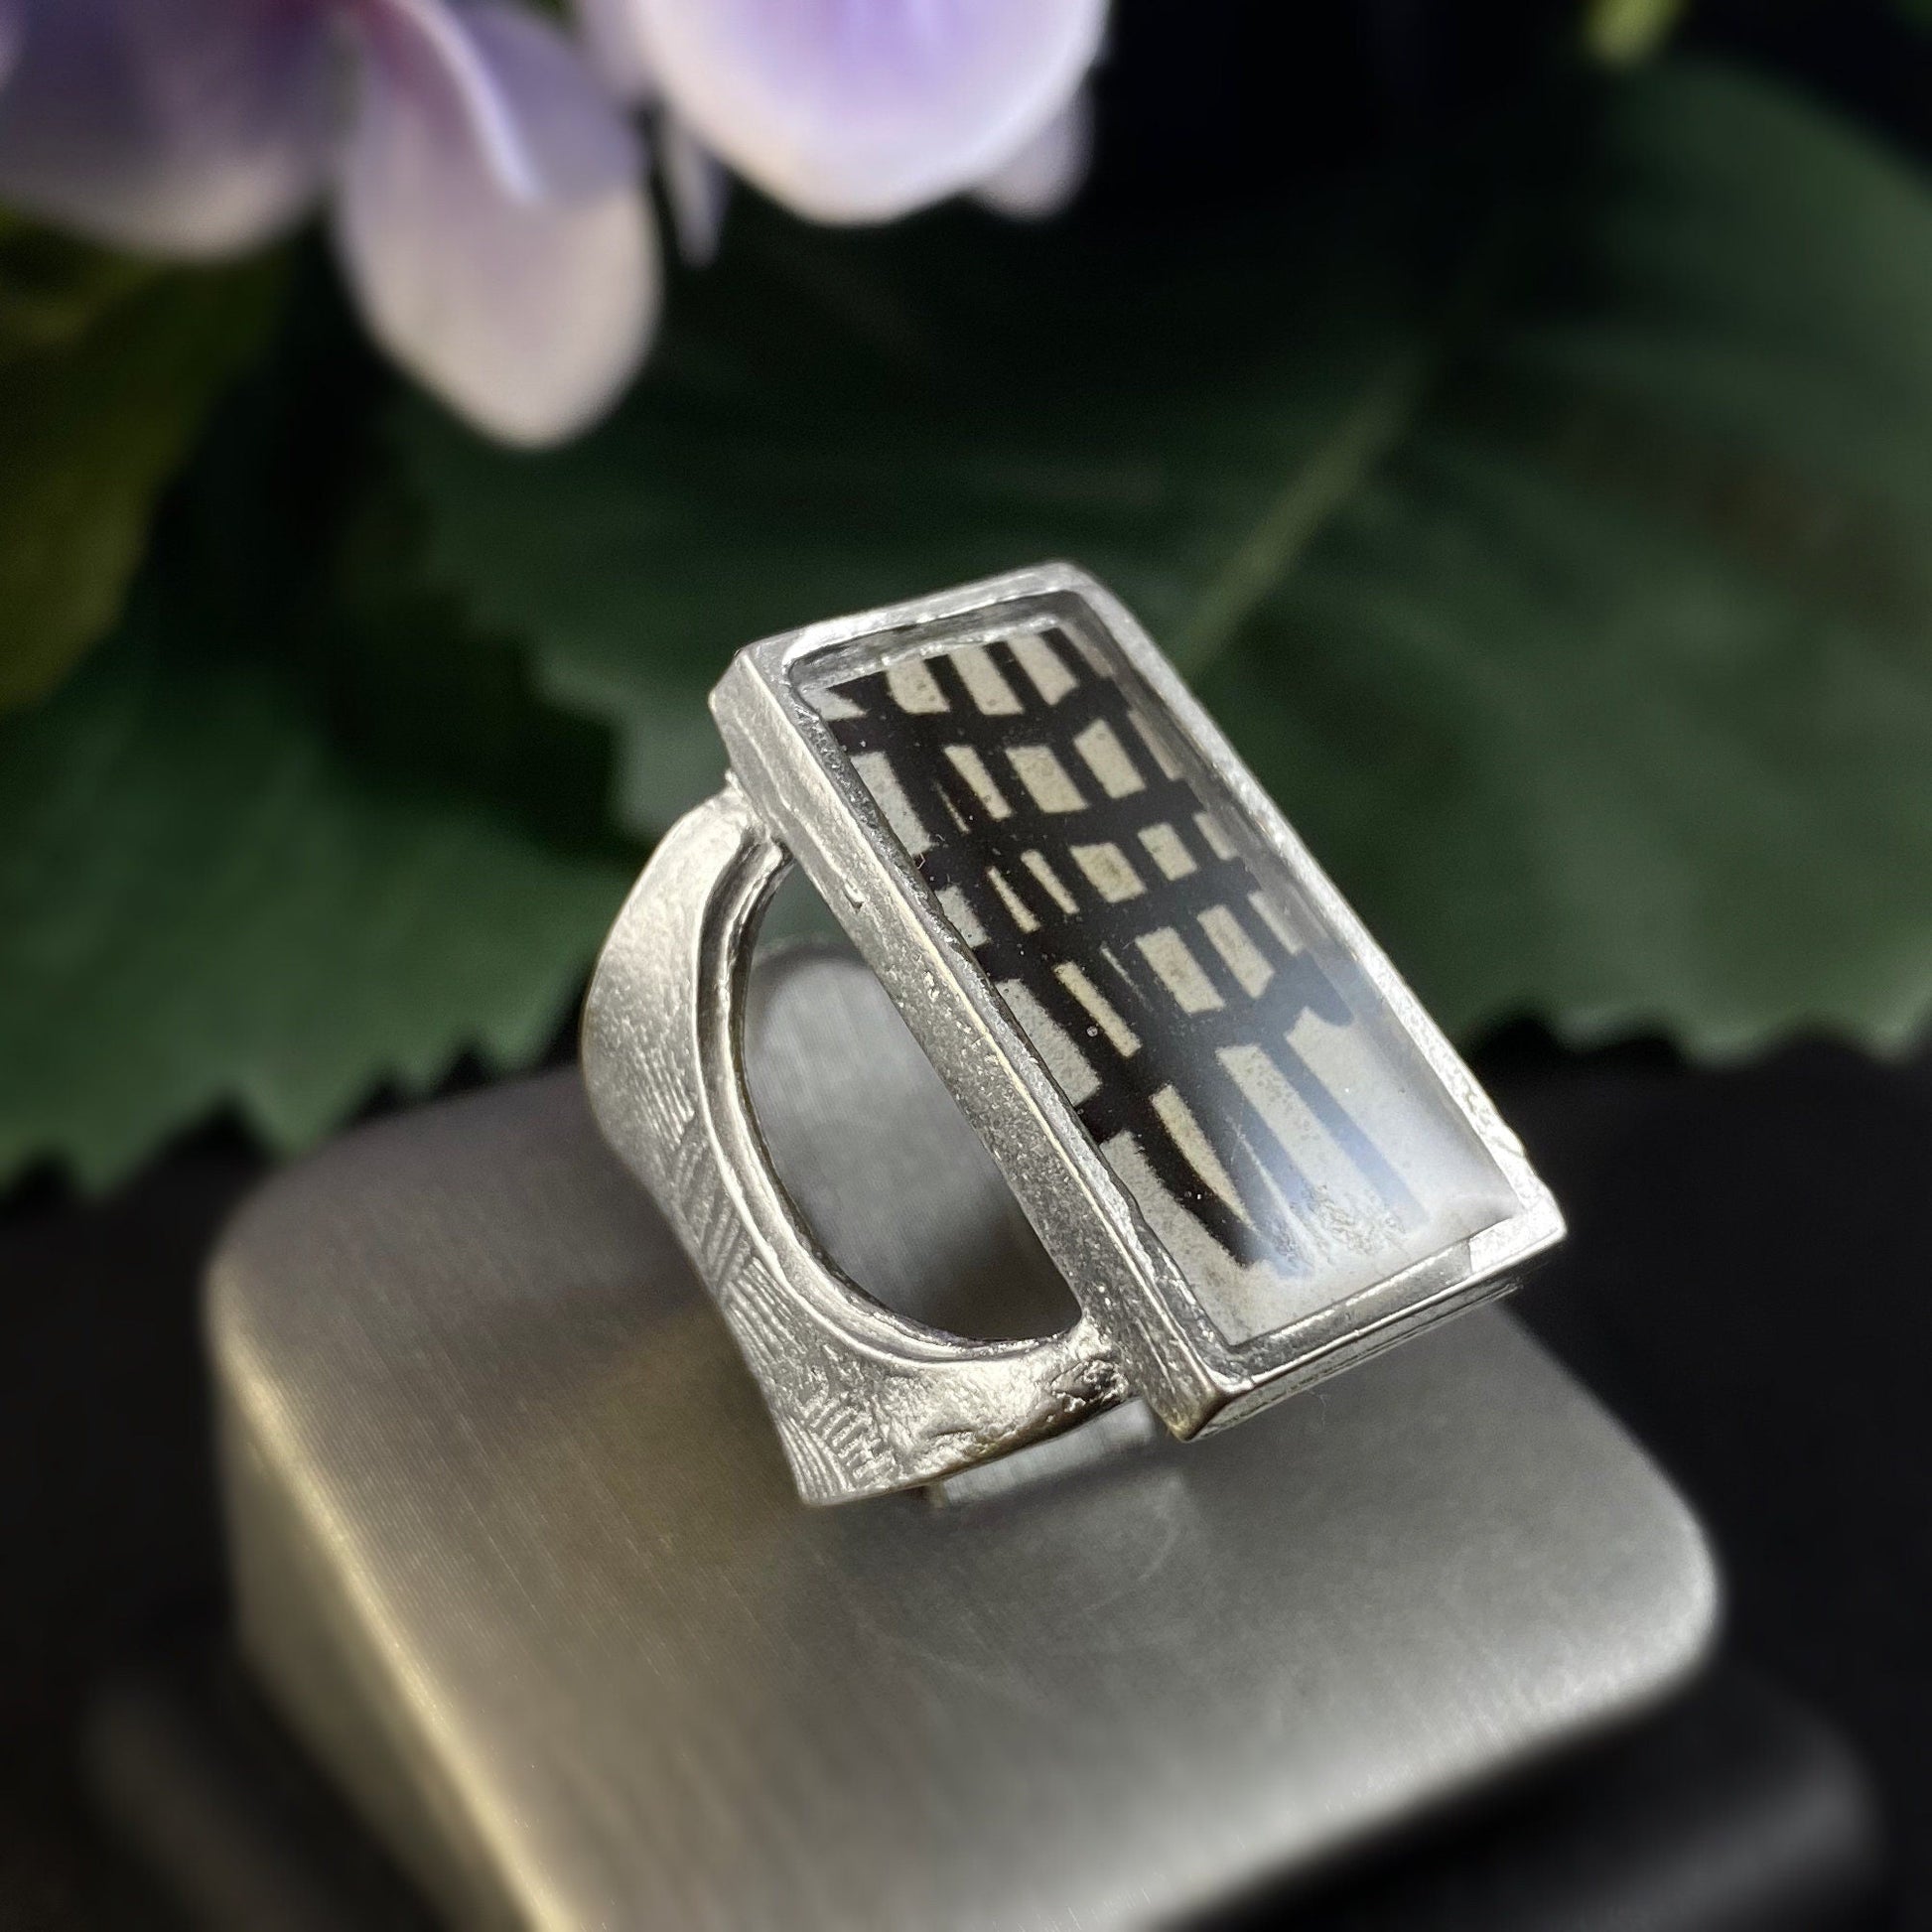 Large Rectangular Statement Ring - Handmade in Canada, Anne-Marie Chagnon Jewelry